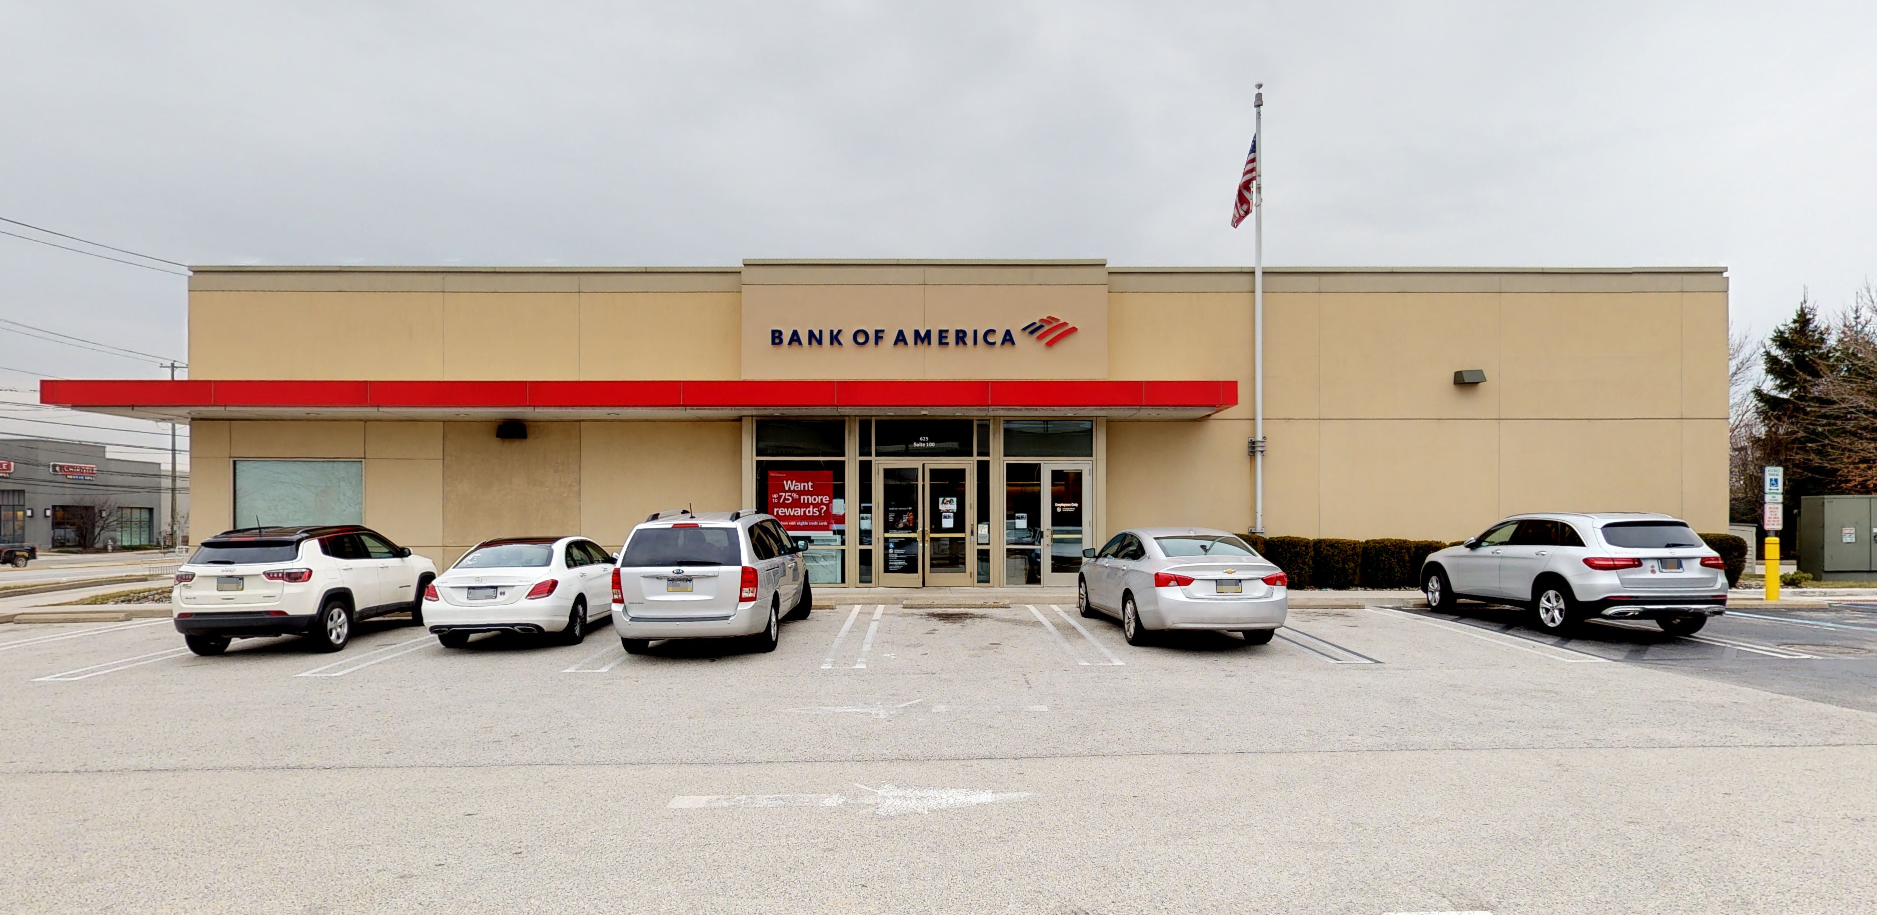 Bank of America financial center with drive-thru ATM | 625 W Dekalb Pike STE 100, King Of Prussia, PA 19406